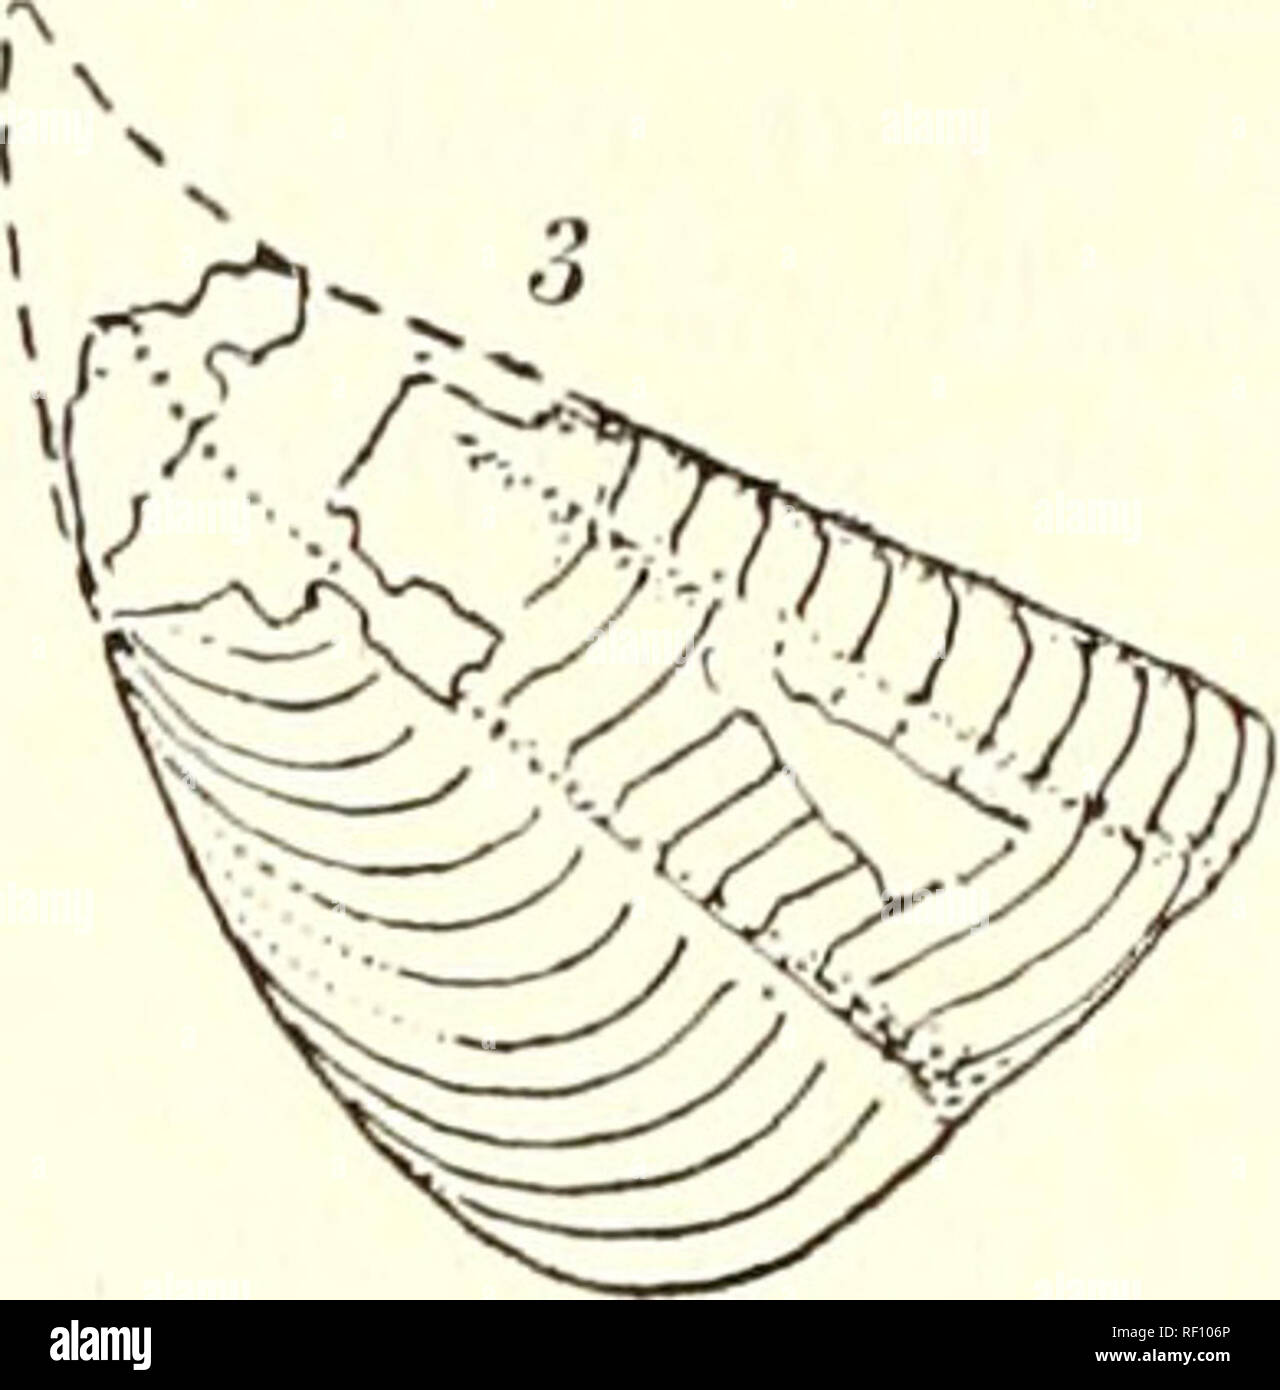 . Catalogue of the Machaeridia (Turrilepas and its allies) in the Department of Geology. 62 BRITISH MUSEUM MACHAERIDIA from those of P. peachi and P. scotictis by the marked sigmoid curve of its growth-lines and the obHque section of the longi- tudinal groove. Without study of a series of the actual plates I do not feel in a position to discriminate the species. PLUMULITES ESTHONICUS Withers (Text-figs. 3-6) 1921, July. Plumulites esthonicus Withers, Ann. Mag. Nat. Hist. (9), VIII, p. 125, text-figs. 1-4. Diagnosis. Kite-shaped plates with the apical part moder- ately attenuated, the growth-li Stock Photo